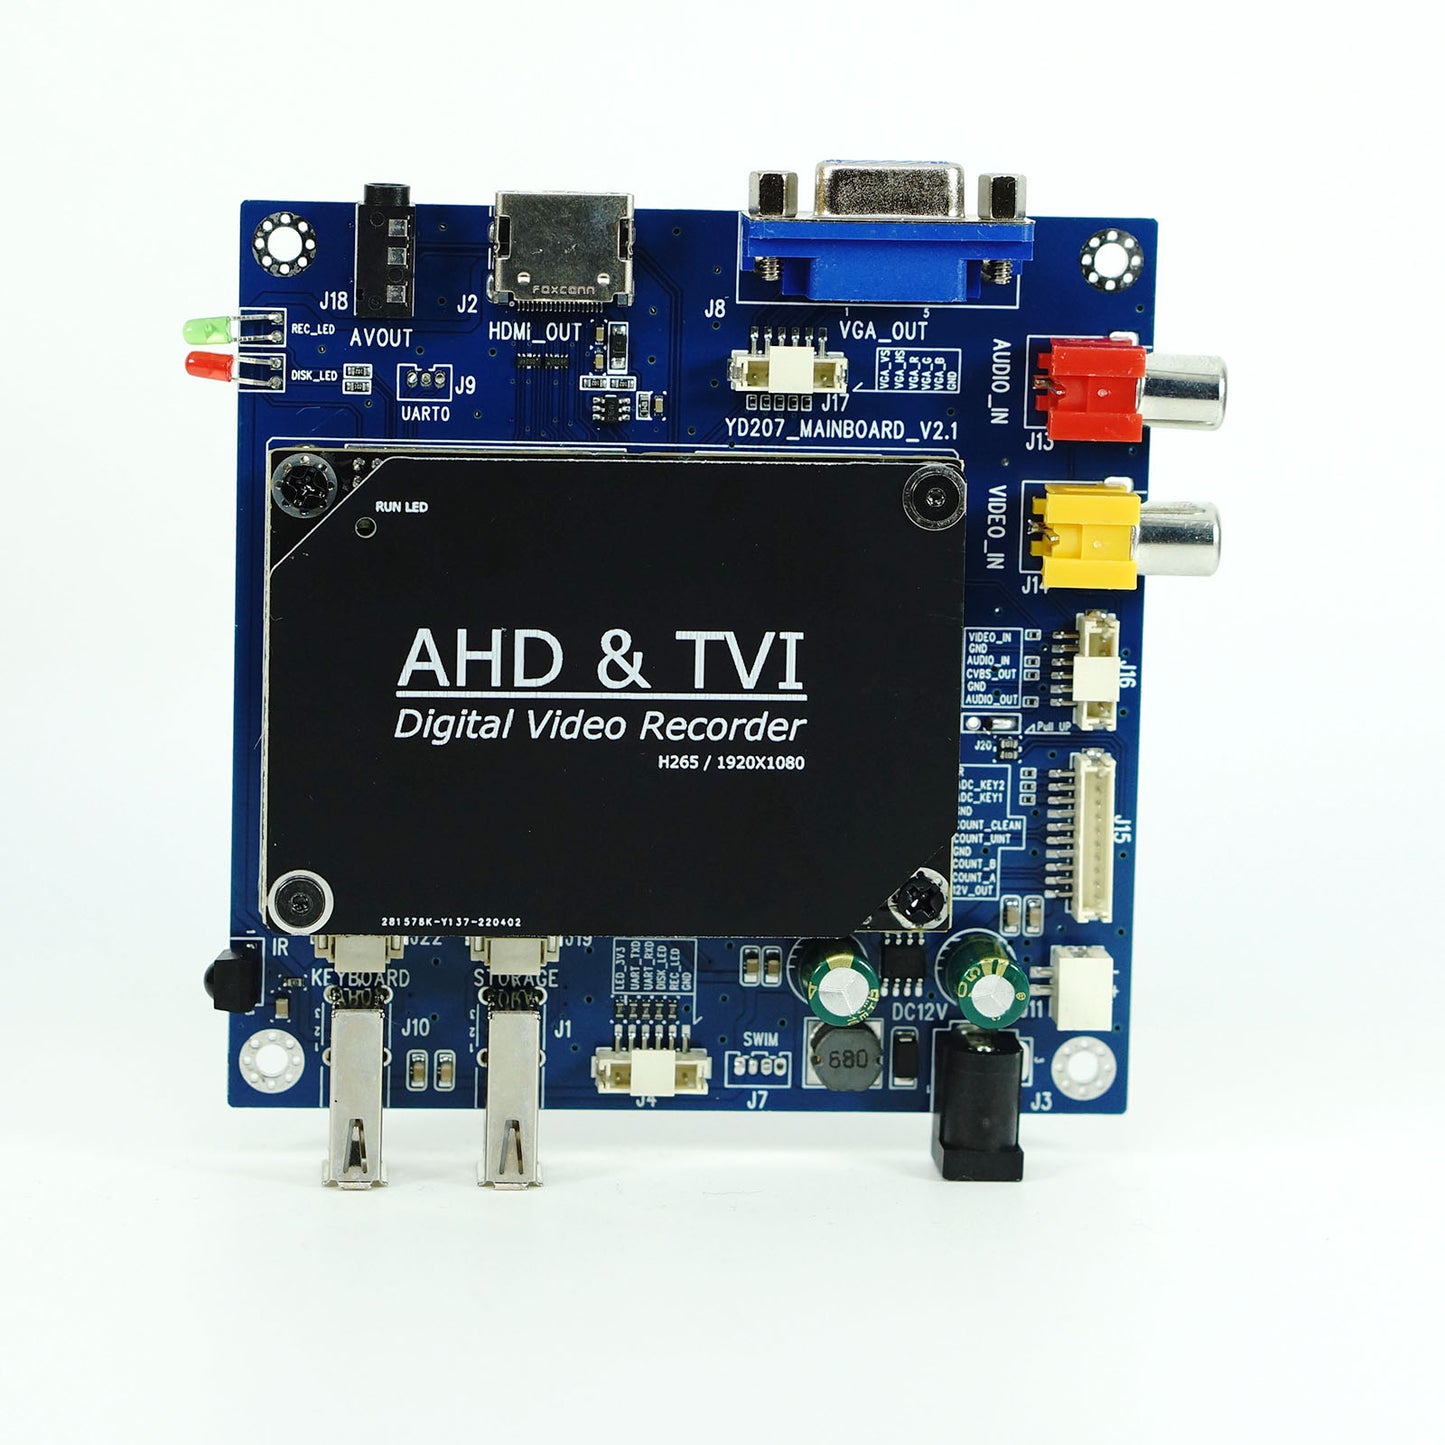 DCH122 mini Pipeline Inspection video Recording System Main Board supports analog CVBS/ AHD 1080P/720P video input